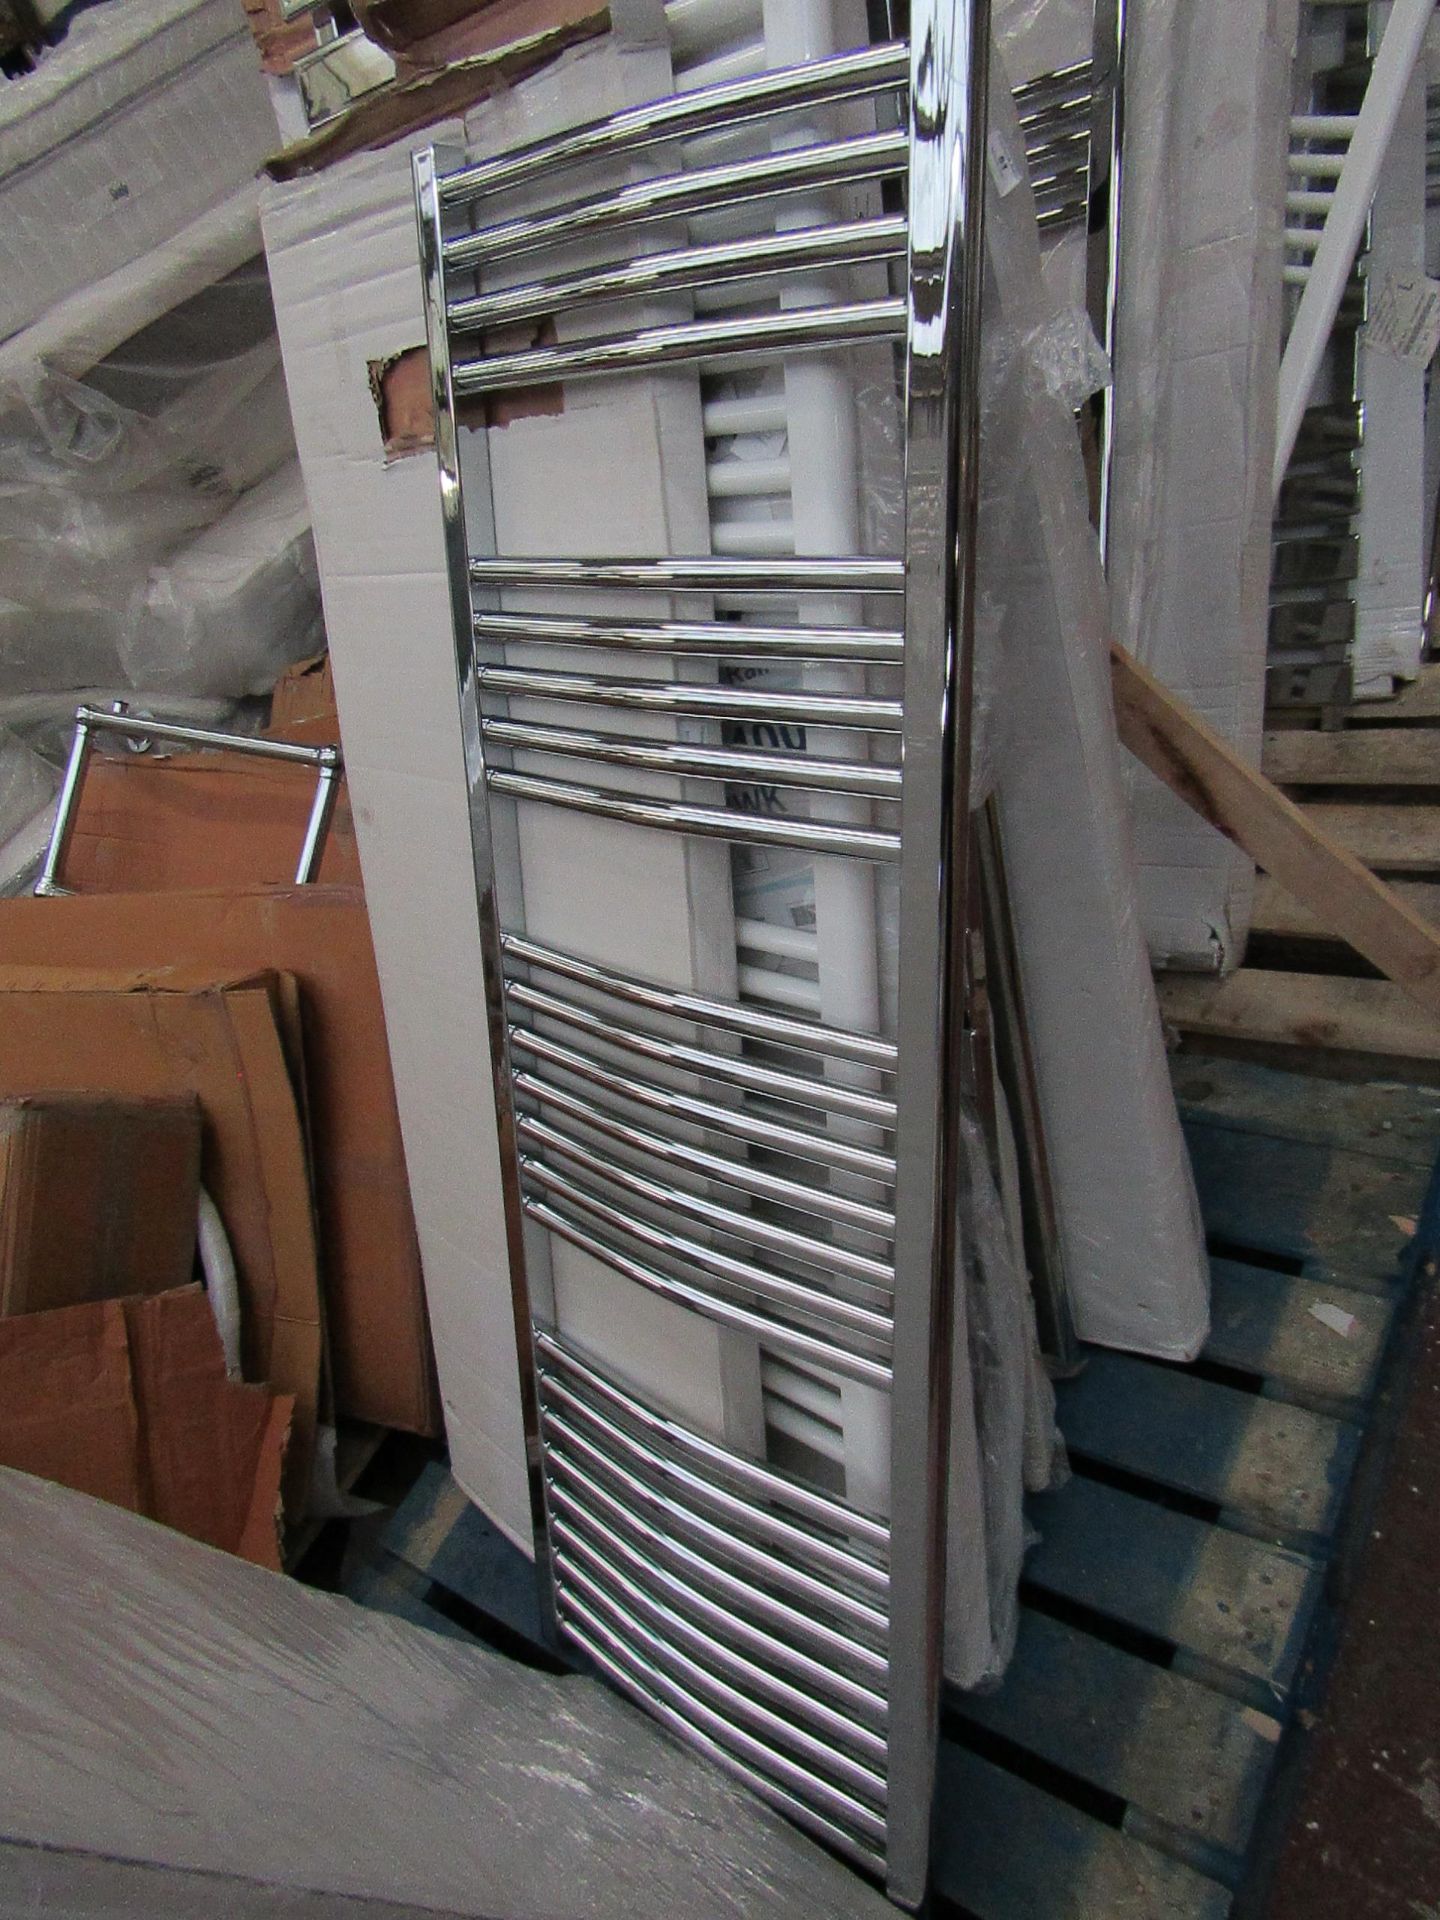 Loco curved towel radiator 1400 x 500, ex-display and boxed. Please note, this lot may contain marks